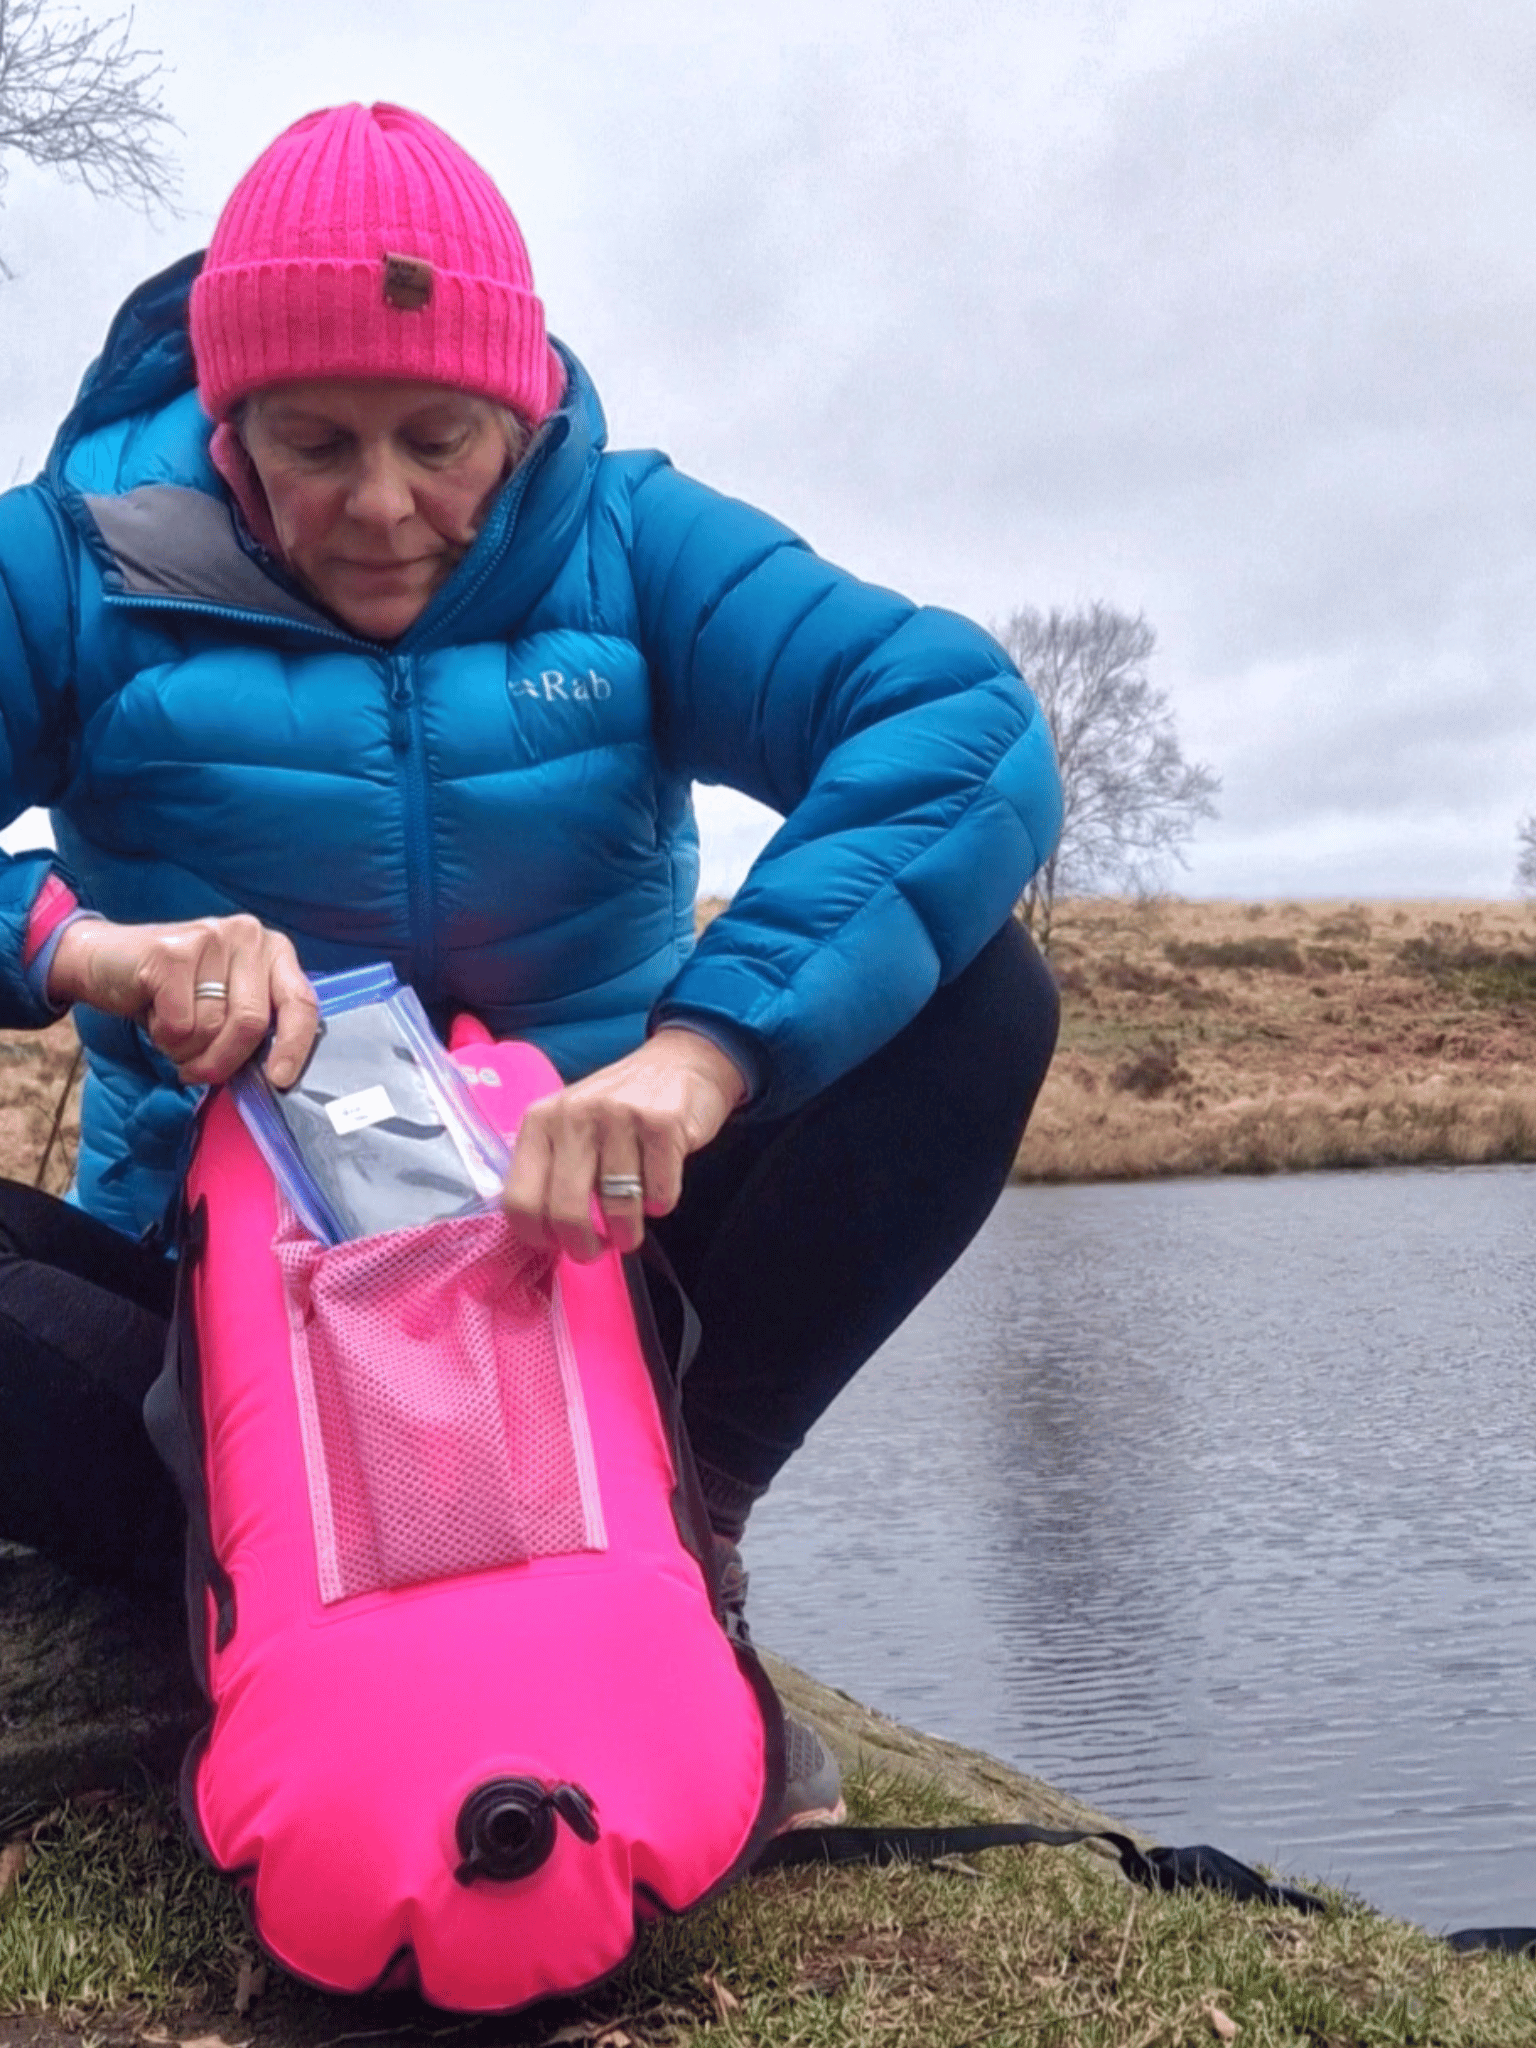 lady at the side of a lake putting a waterproof phone case into the mesh pocket on top of a pink tow float